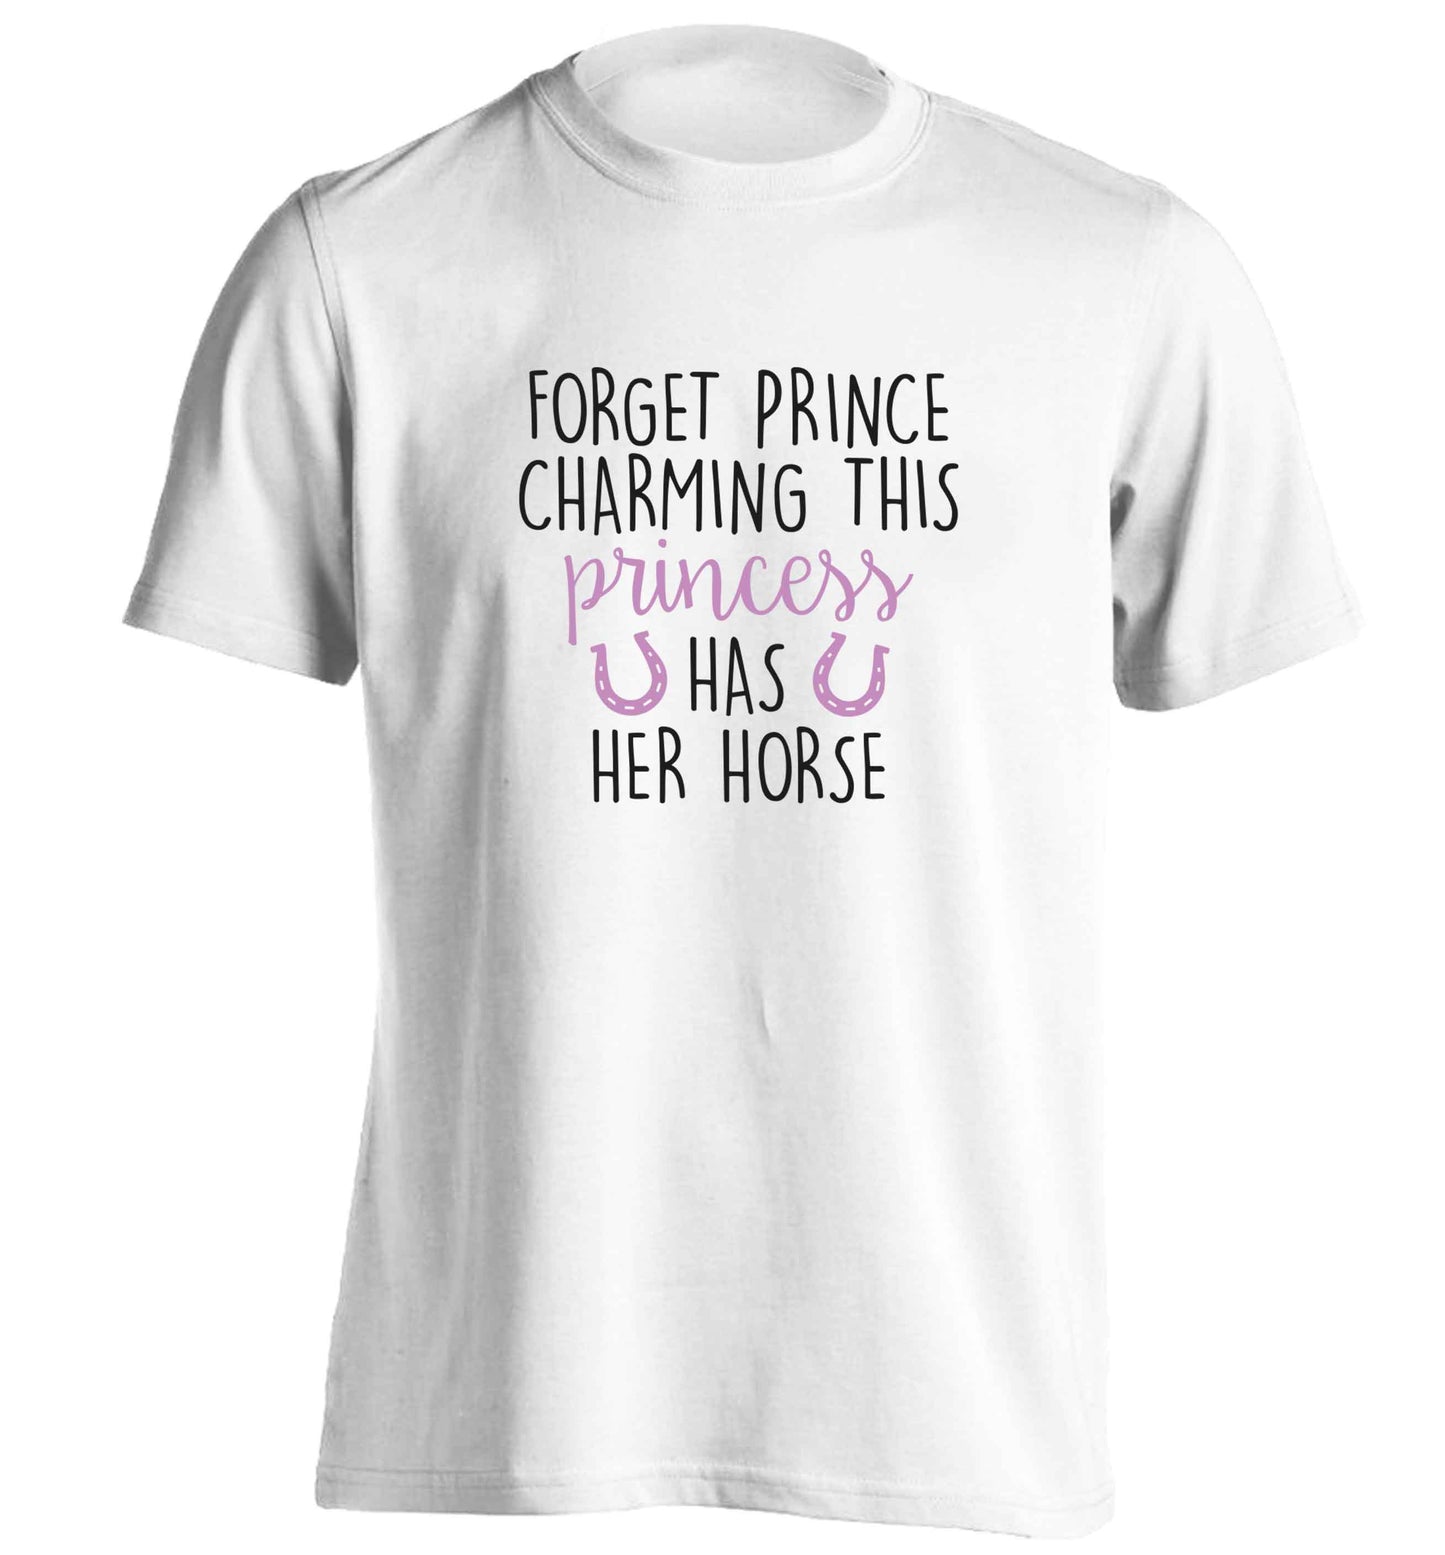 Forget prince charming this princess has her horse adults unisex white Tshirt 2XL